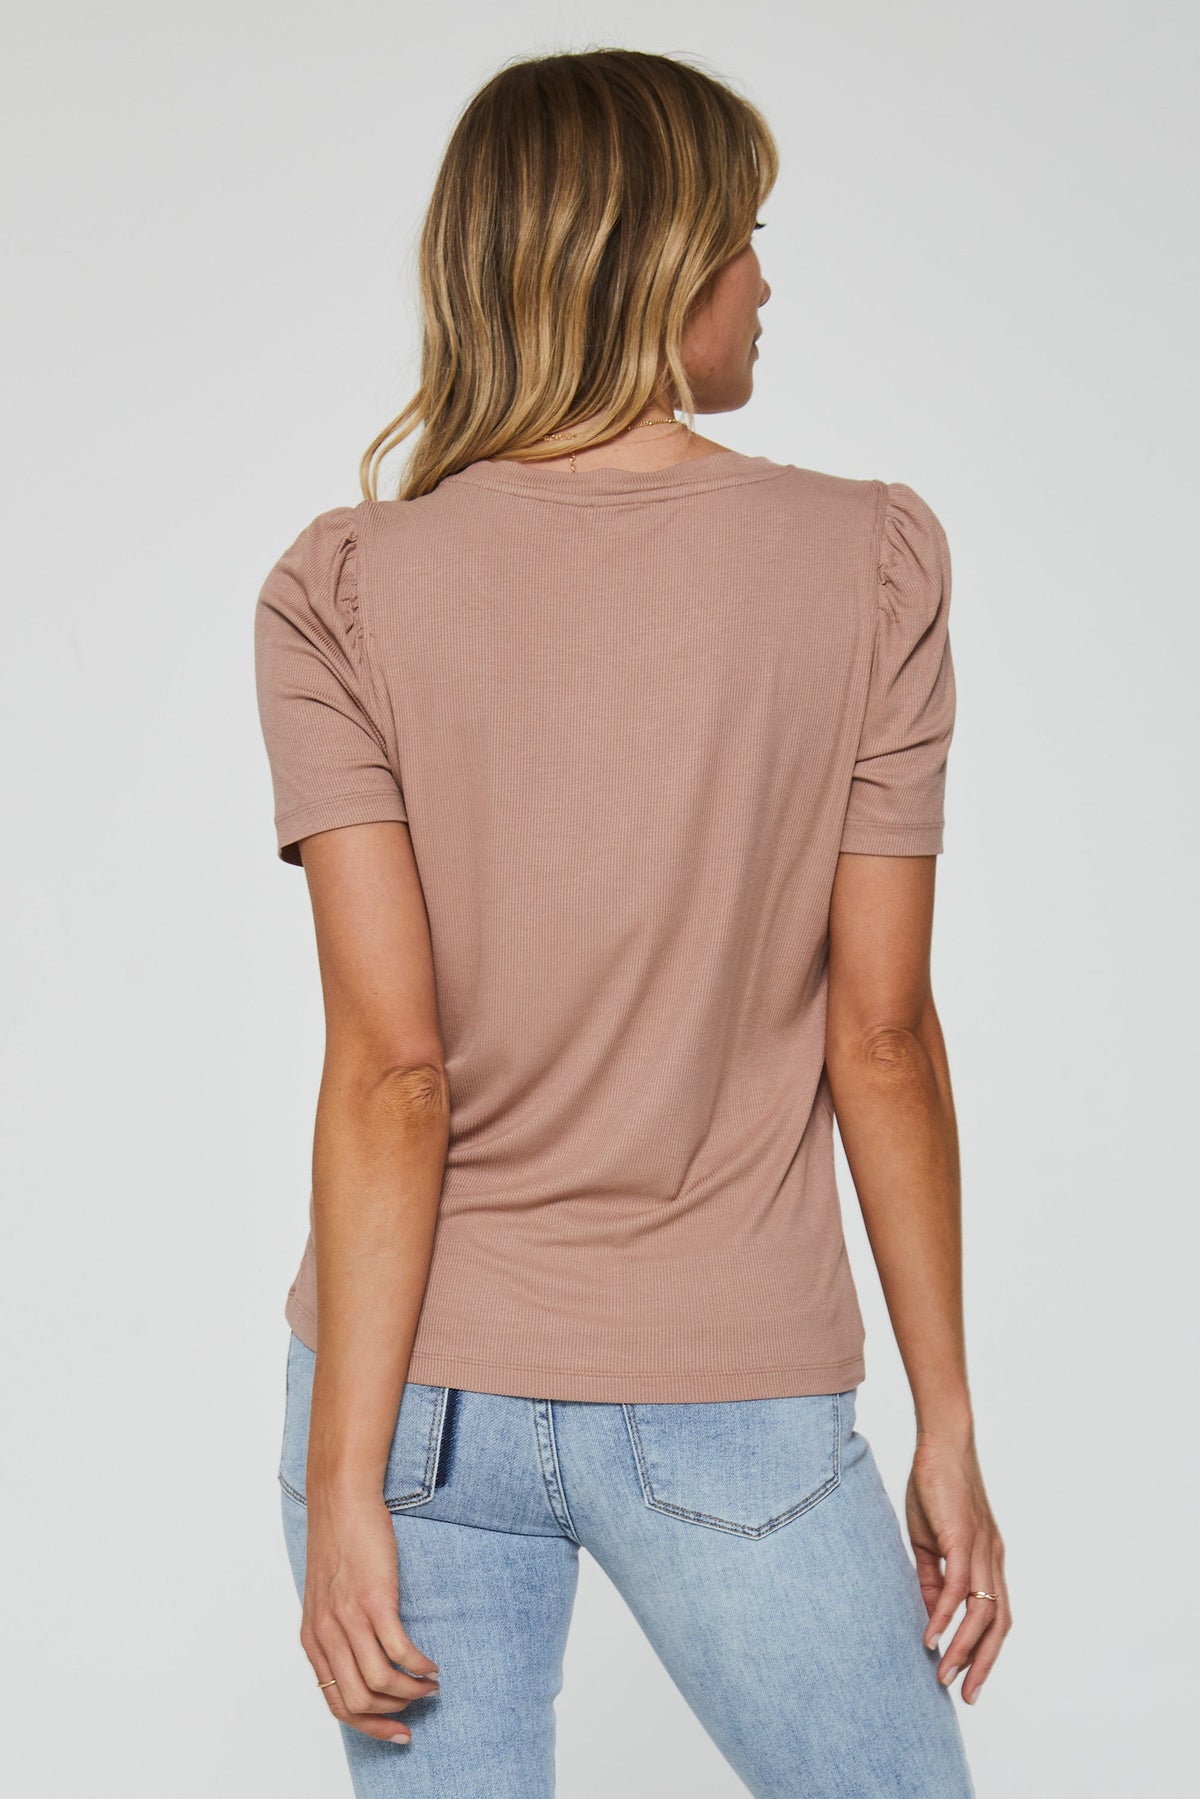 siena-rib-shirred-top-pink-clay-back-image-another-love-clothing